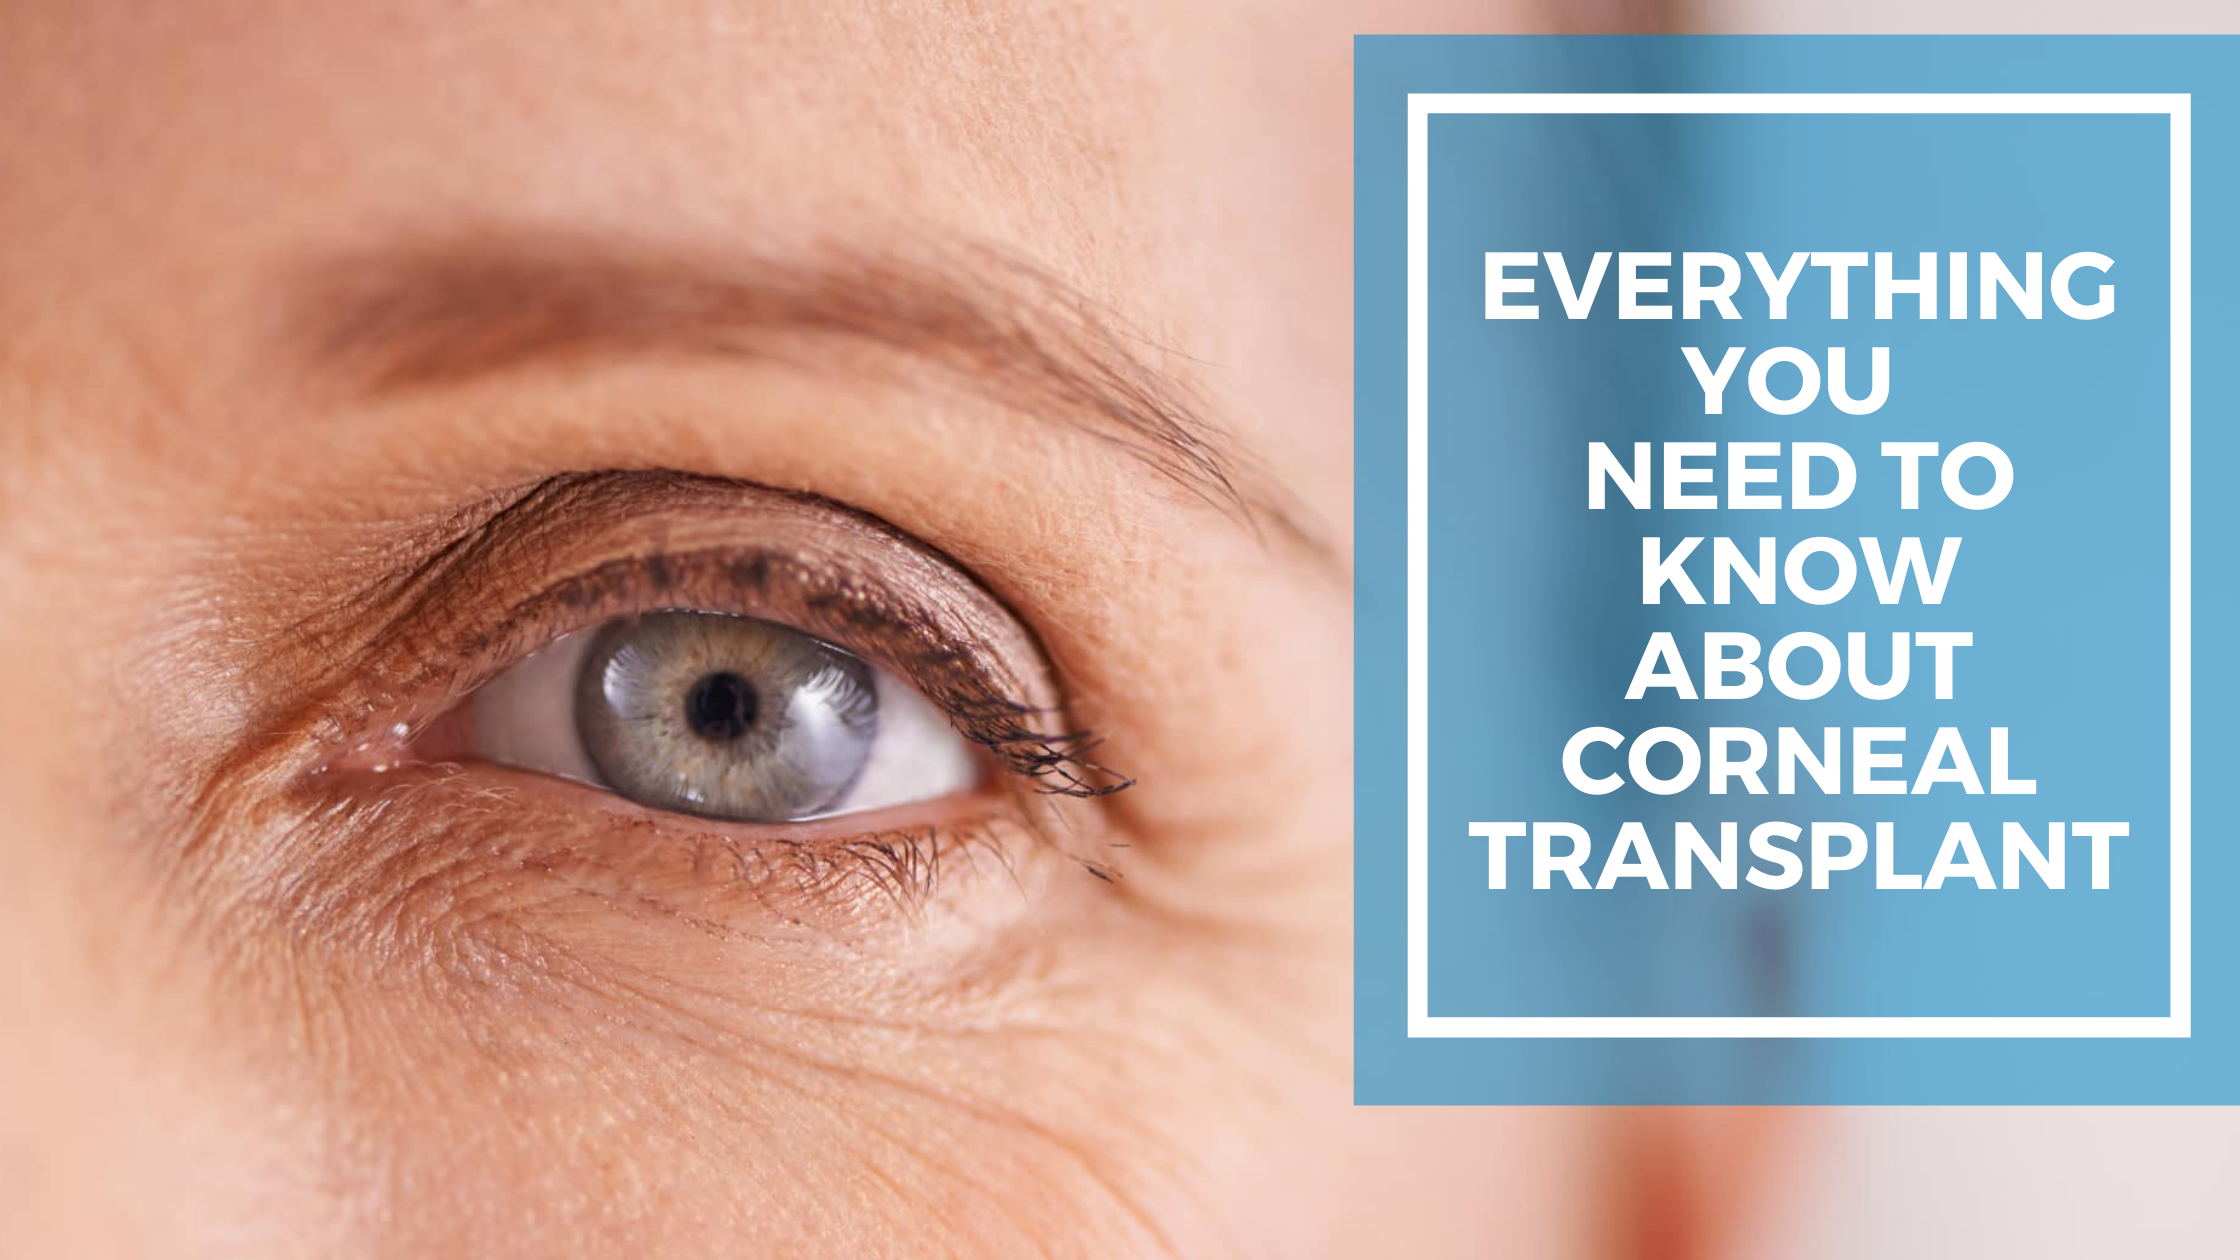 Everything you Need to know About Corneal Transplant